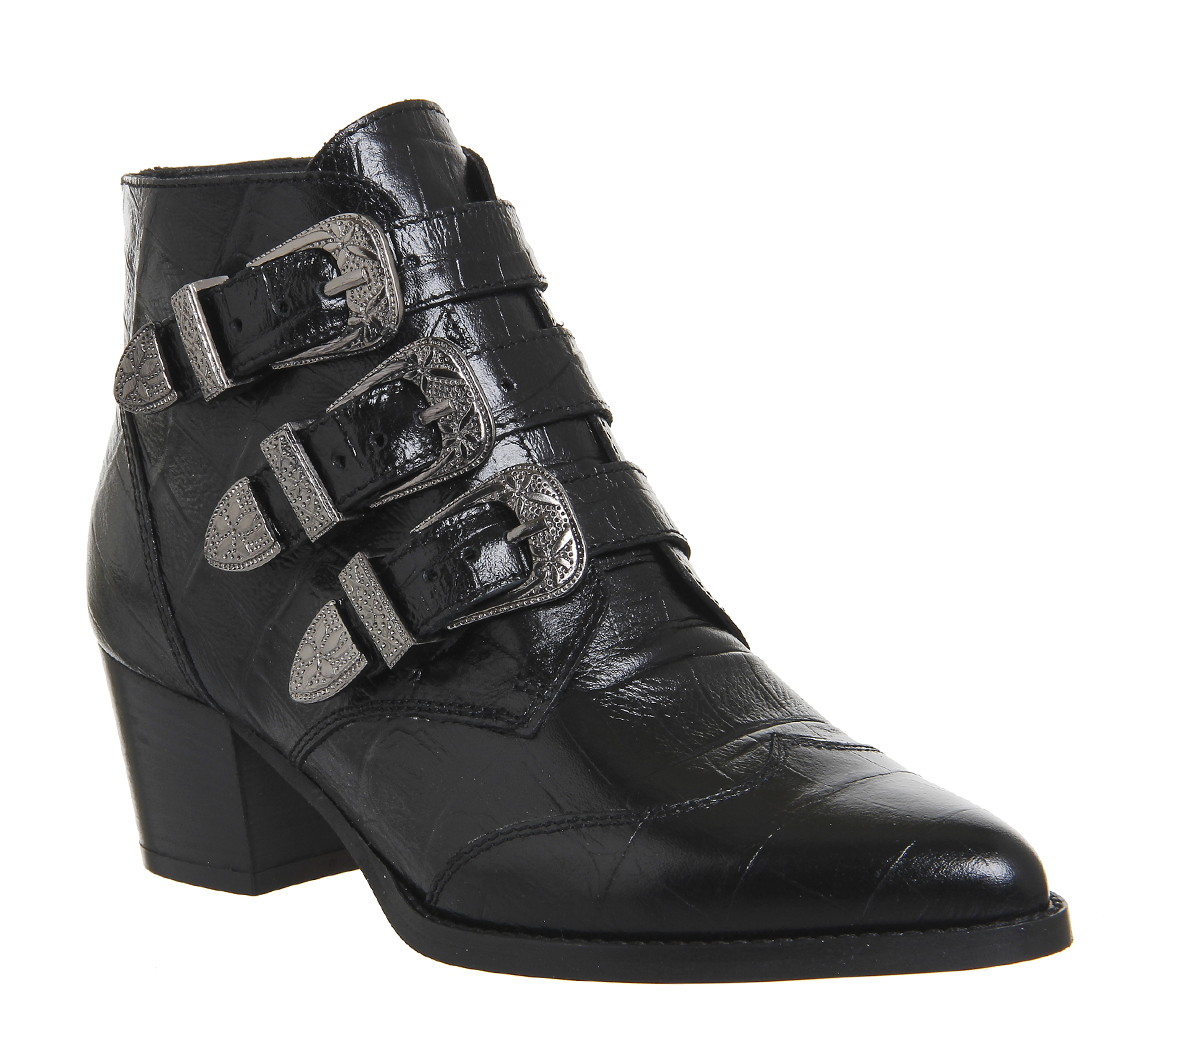 OFFICE Jagger Multi Buckle Boots Black Croc Embossed Leather - Women's ...